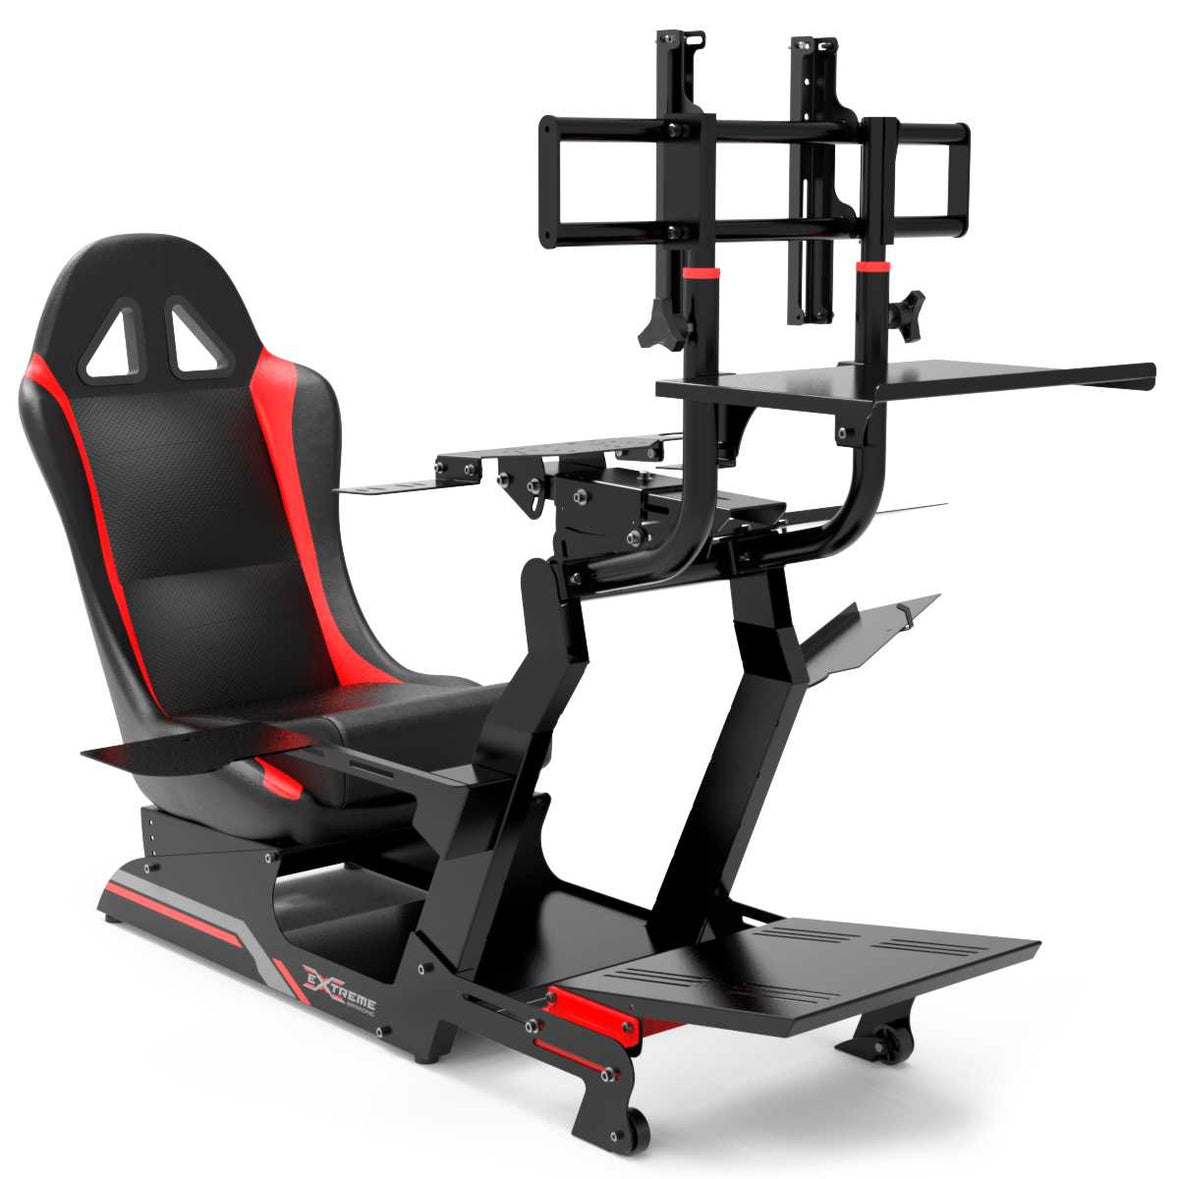 Extreme Simracing Workstation Articulated Keyboard For Virtual